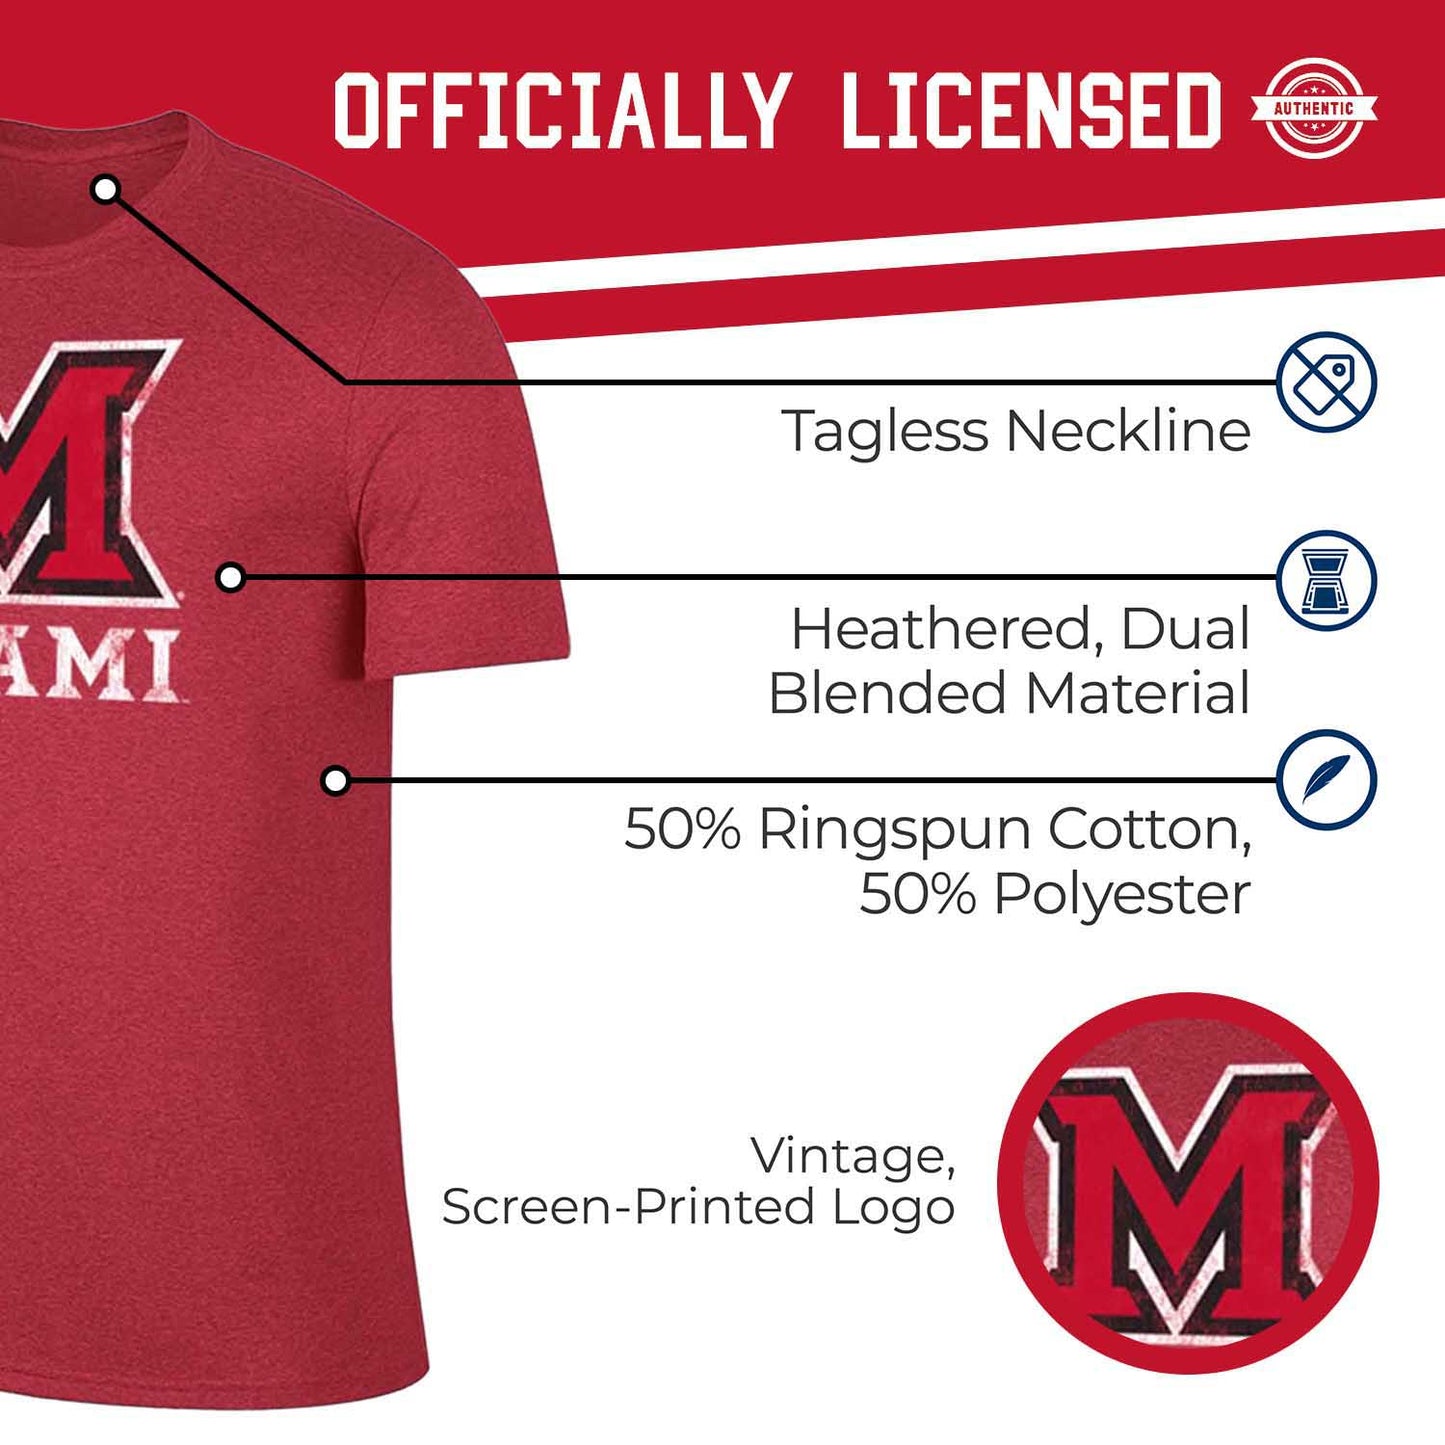 Miami Redhawks Adult MVP Heathered Cotton Blend T-Shirt - Red